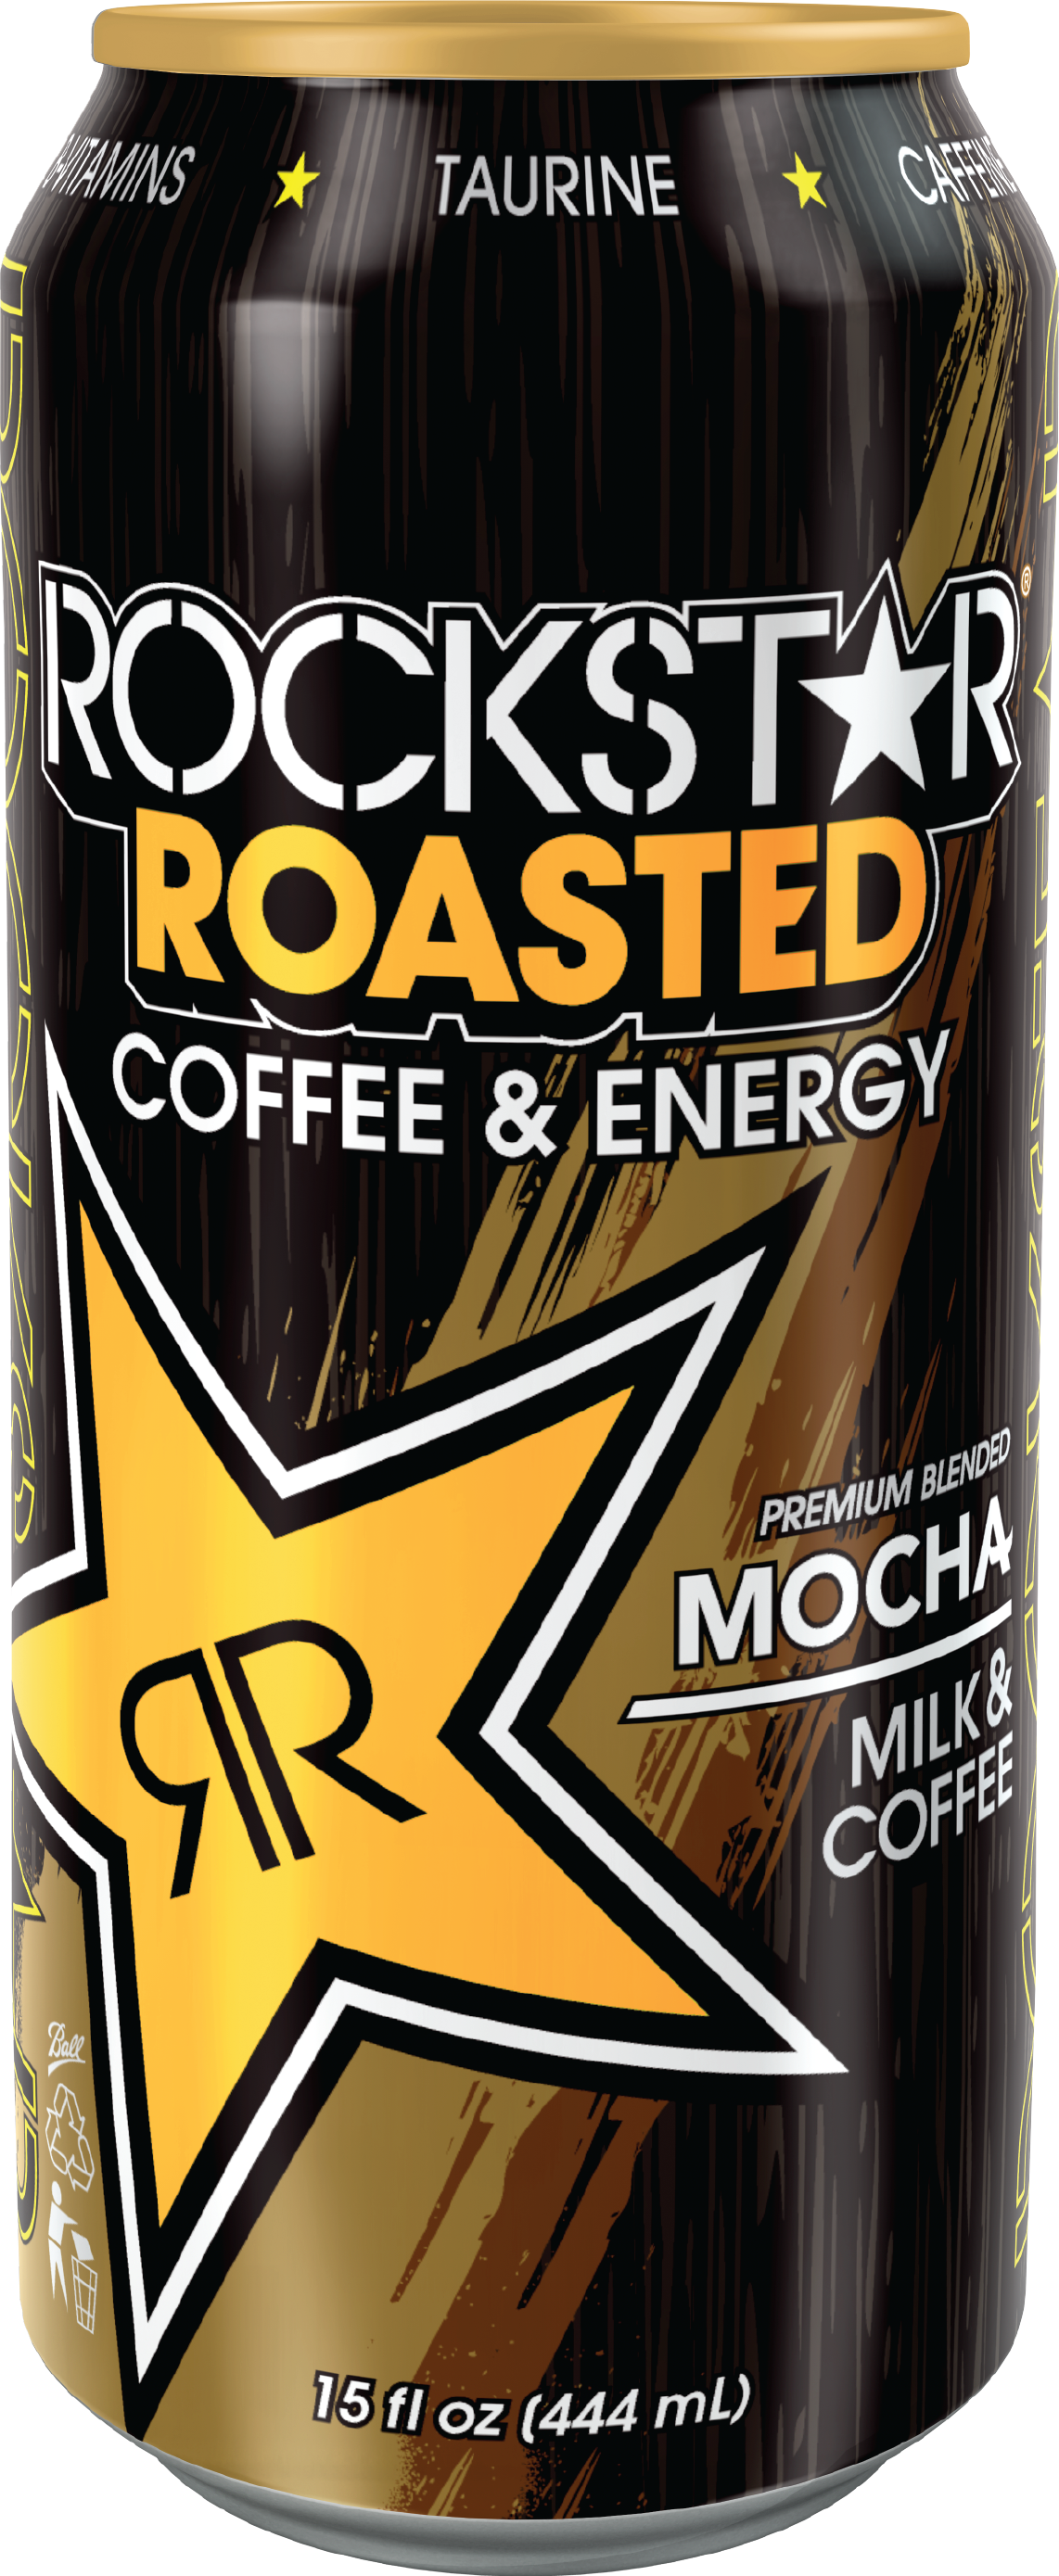 A Can Of Coffee With A Star On It